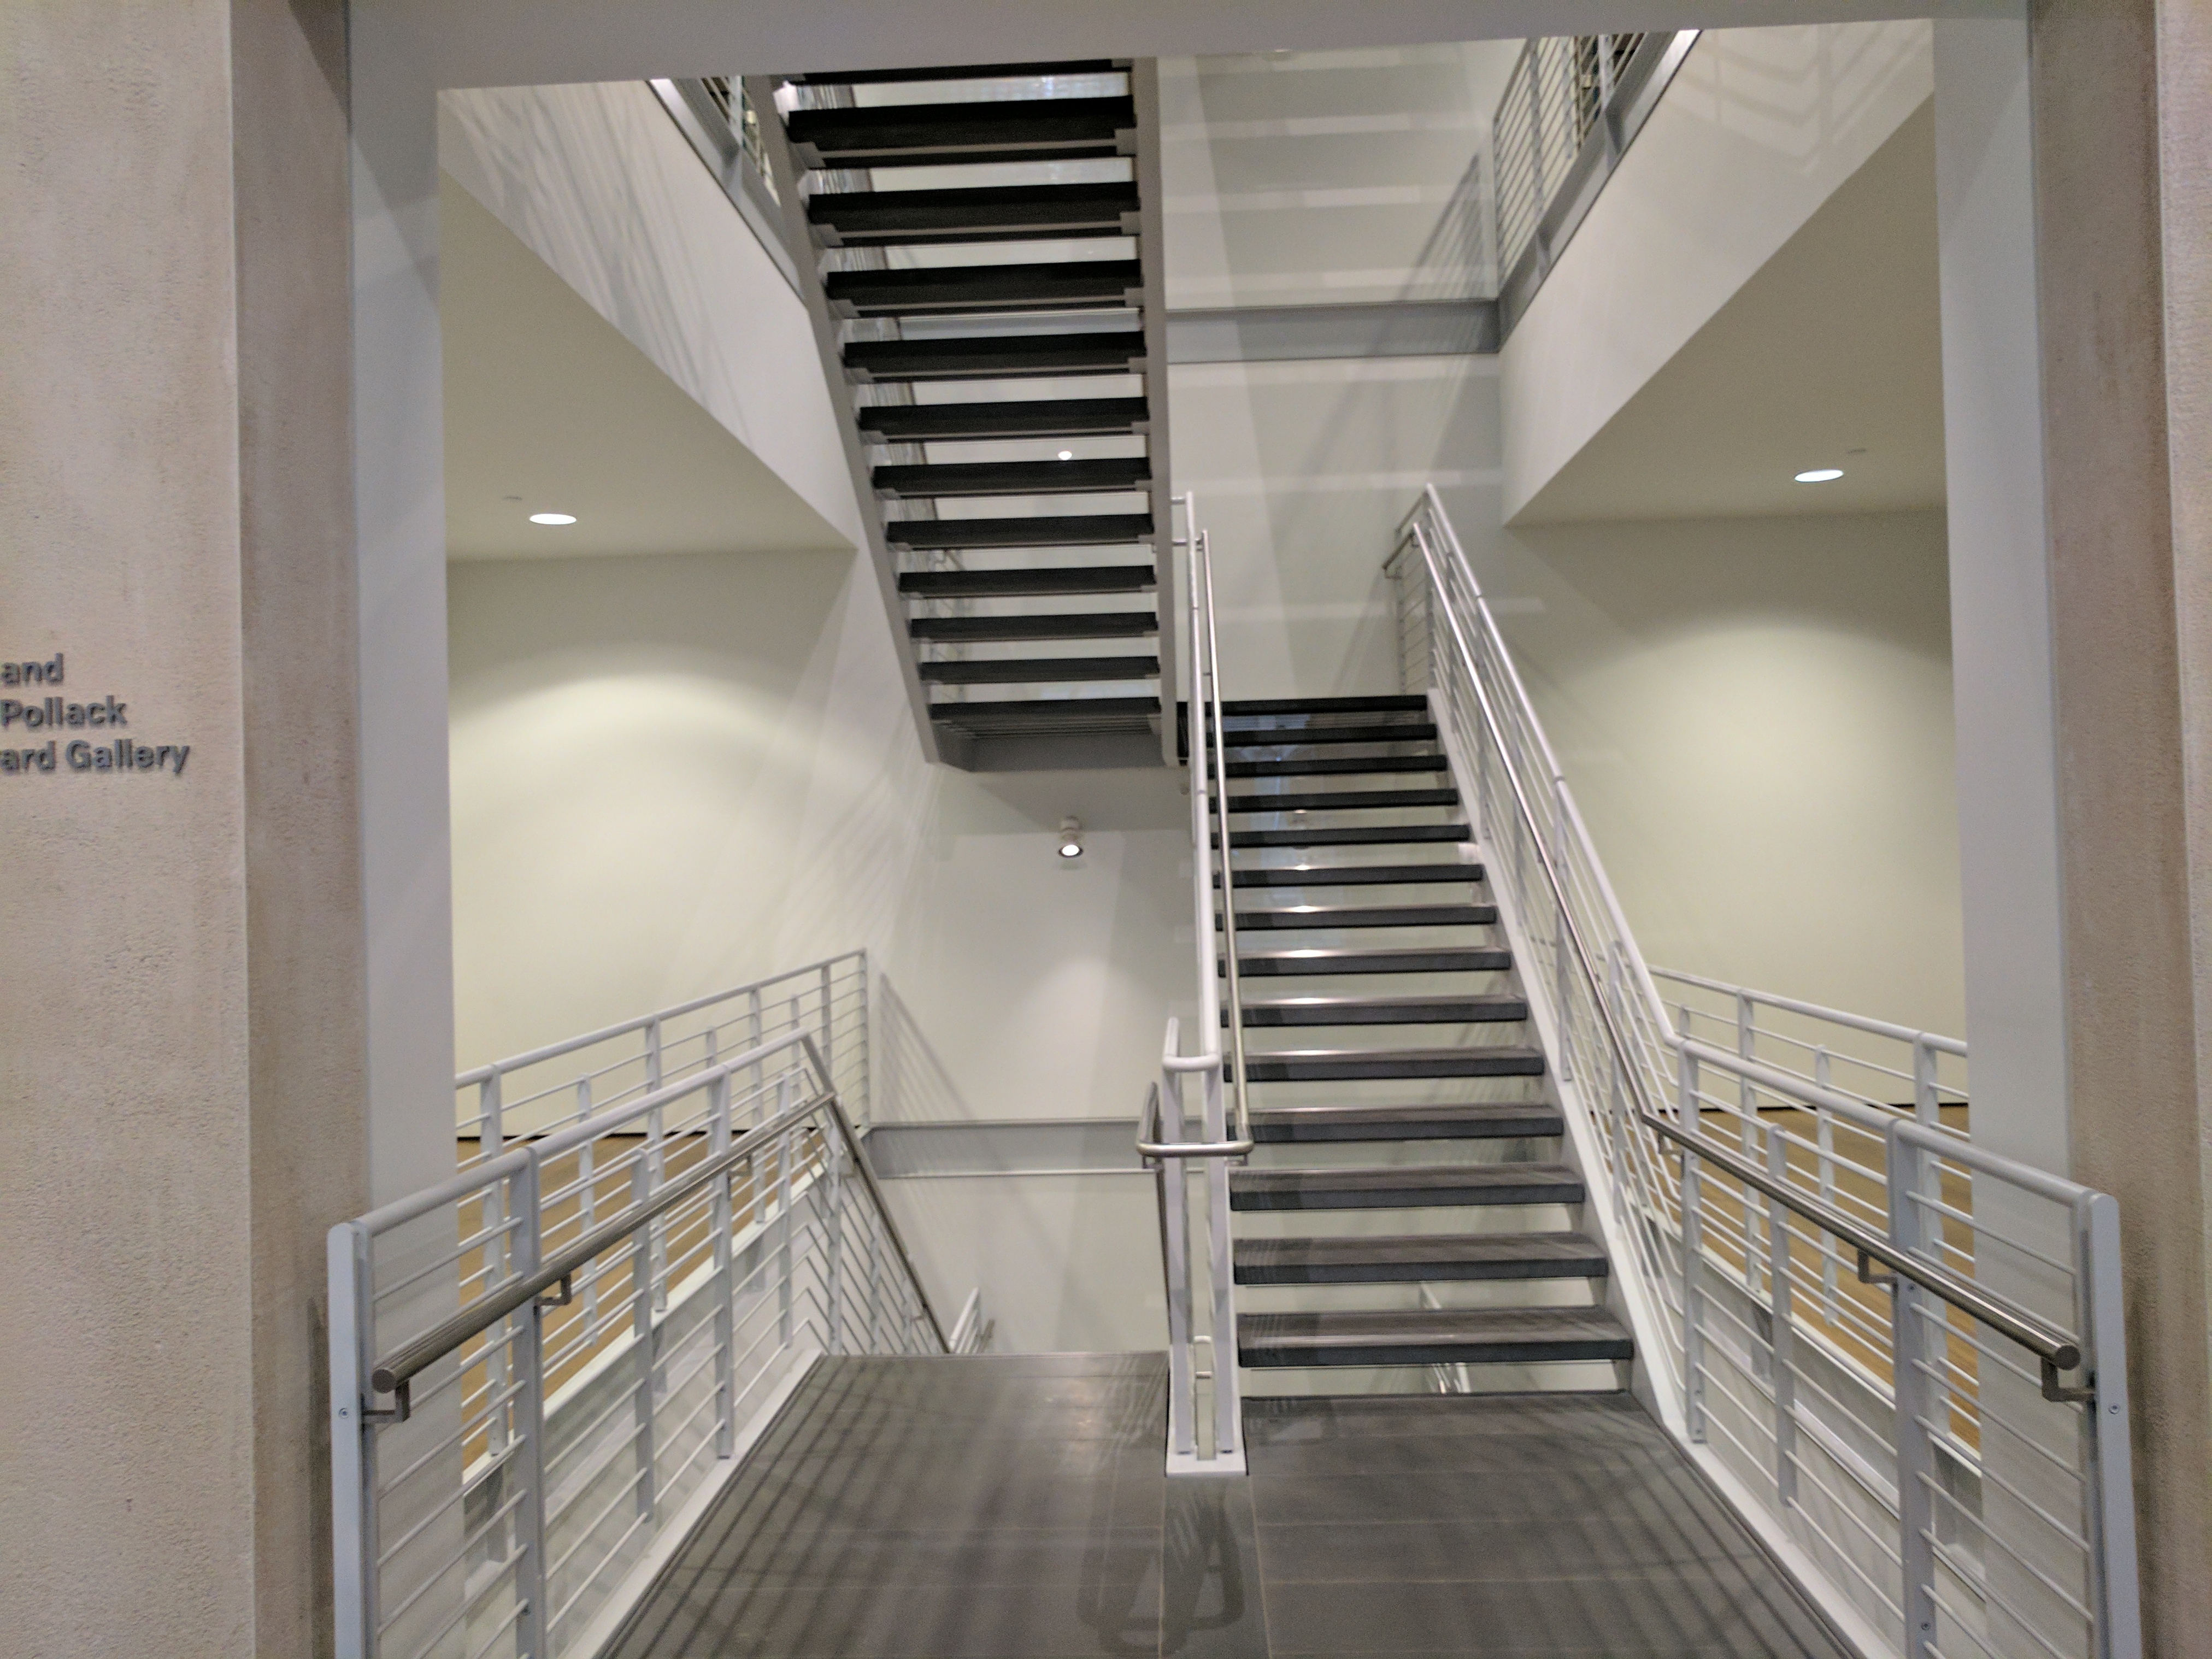 An image of the second floor stairwell of the HAM.